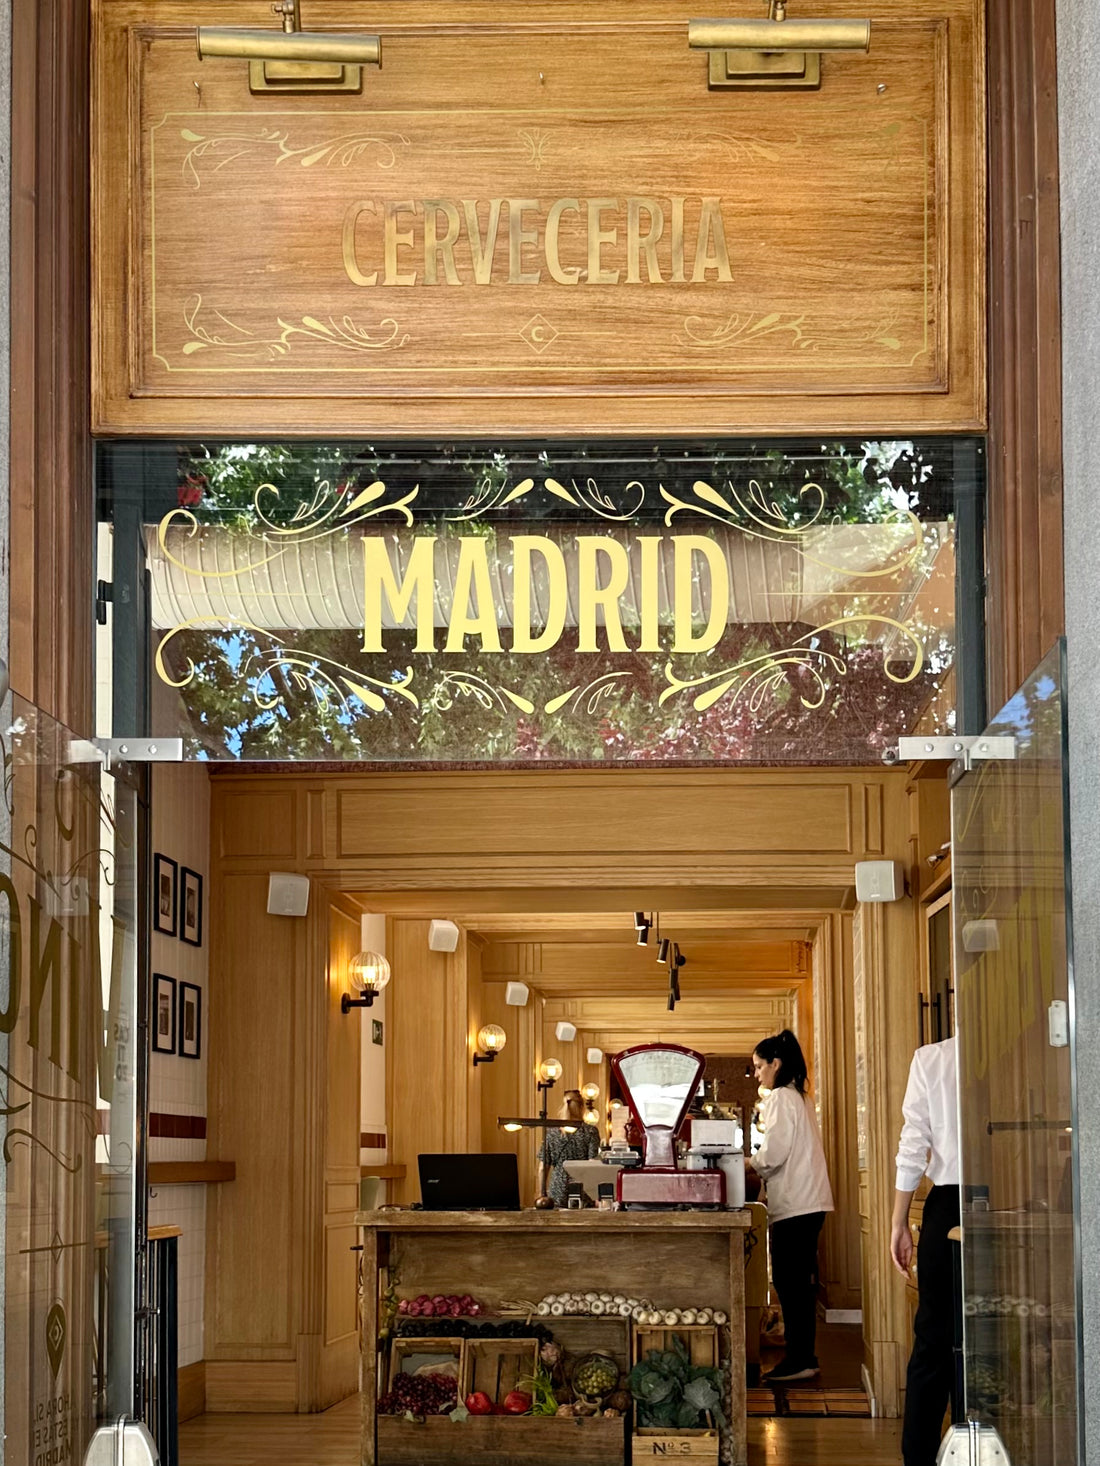 Underrated Madrid and what makes it so beautiful